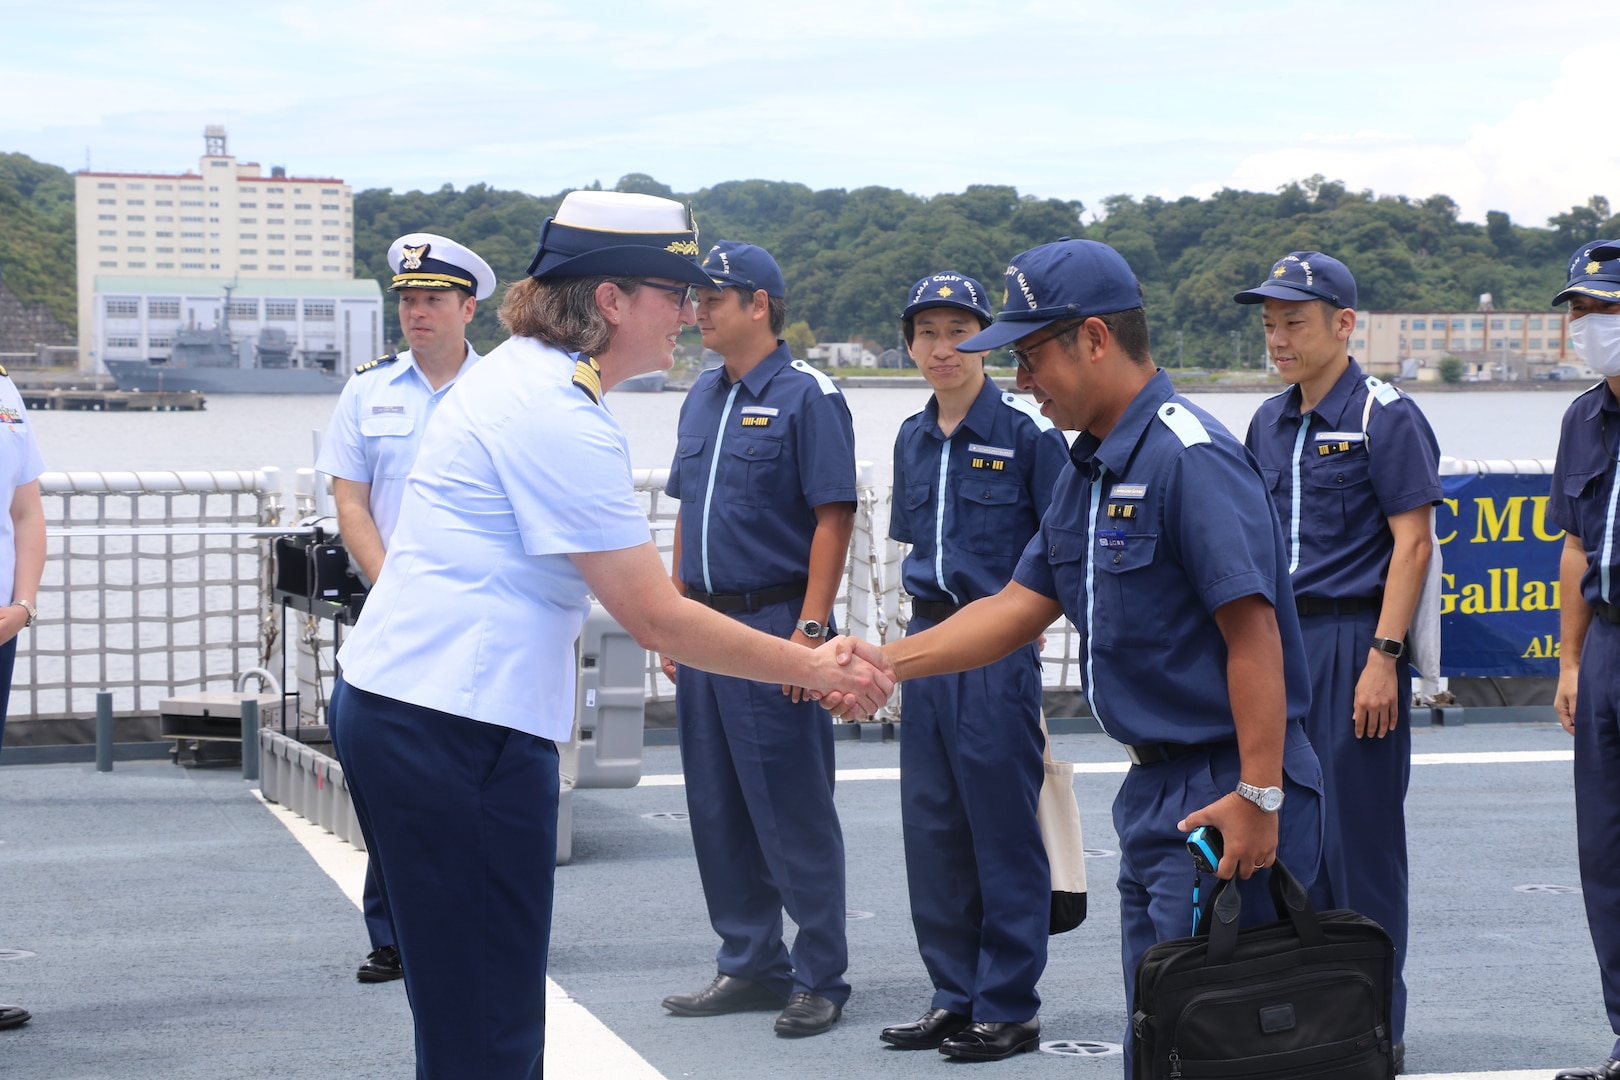 Capt. Rula Deisher, U.S. Coast Guard Cutter Munro’s (WMSL 755) commanding officer, welcomes members from the Japan Coast Guard aboard the Munro during the cutter’s port call to Yokosuka, Japan, Aug. 8, 2023. Yokosuka was Munro’s first international port call during their months-long deployment to the Indo-Pacific region. (U.S. Coast Guard photo)